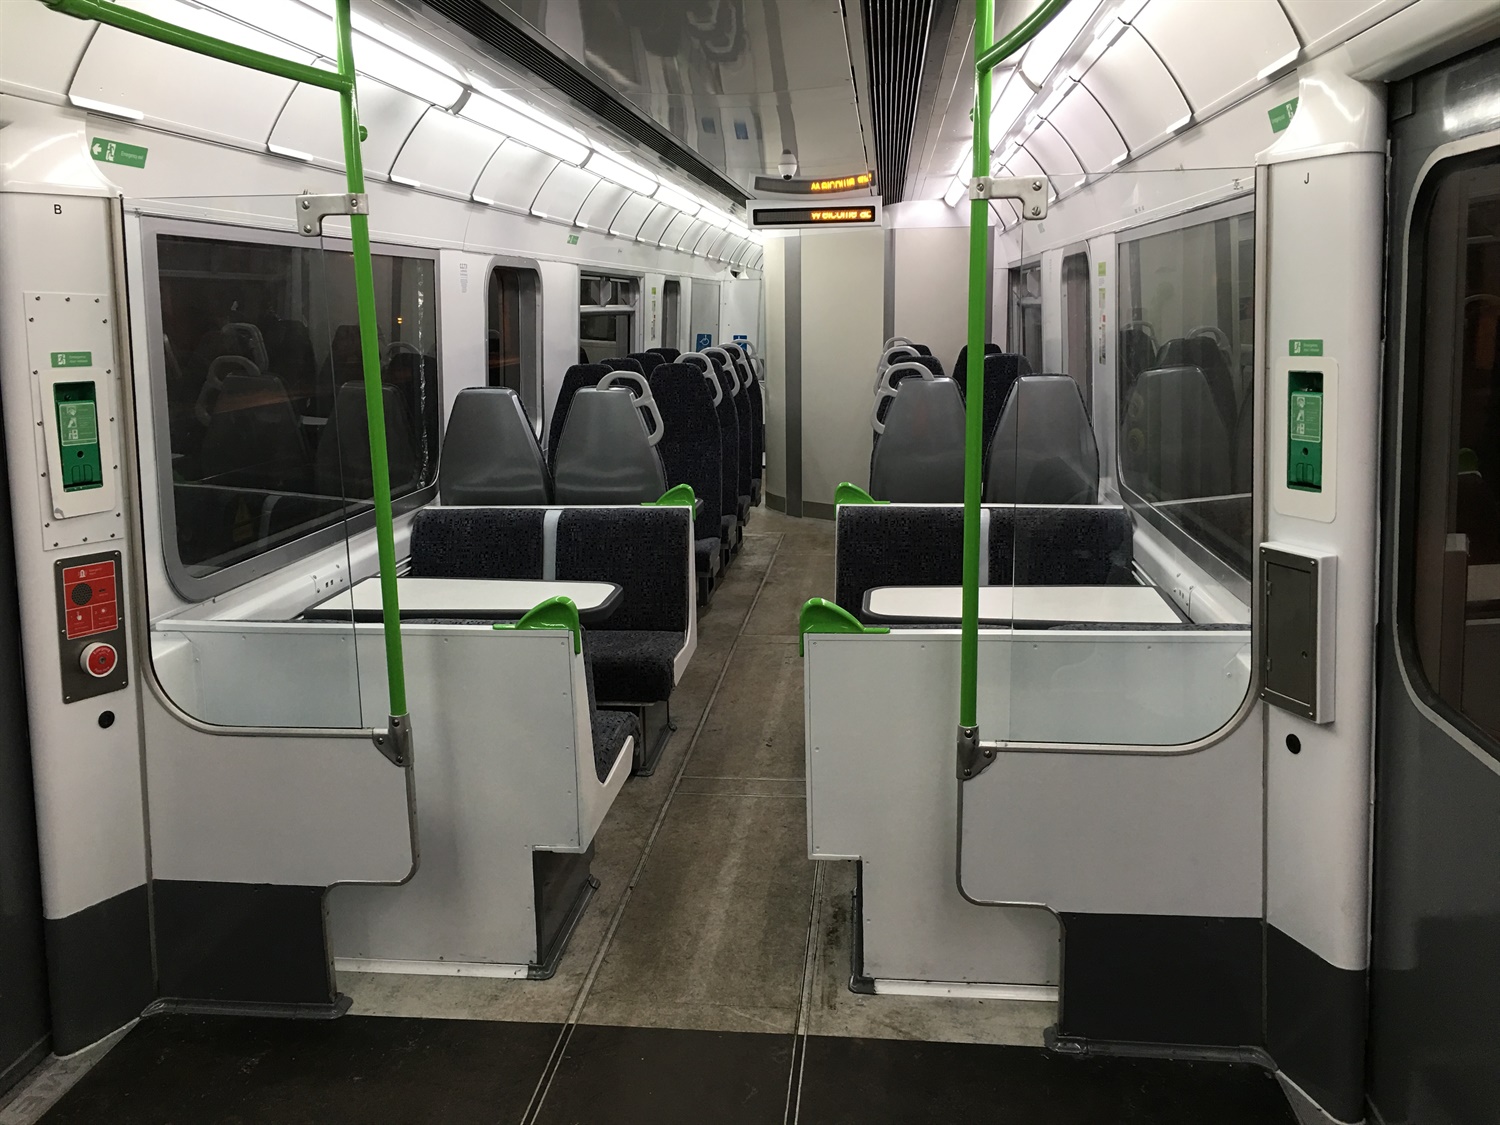 d-train middle car interior finished